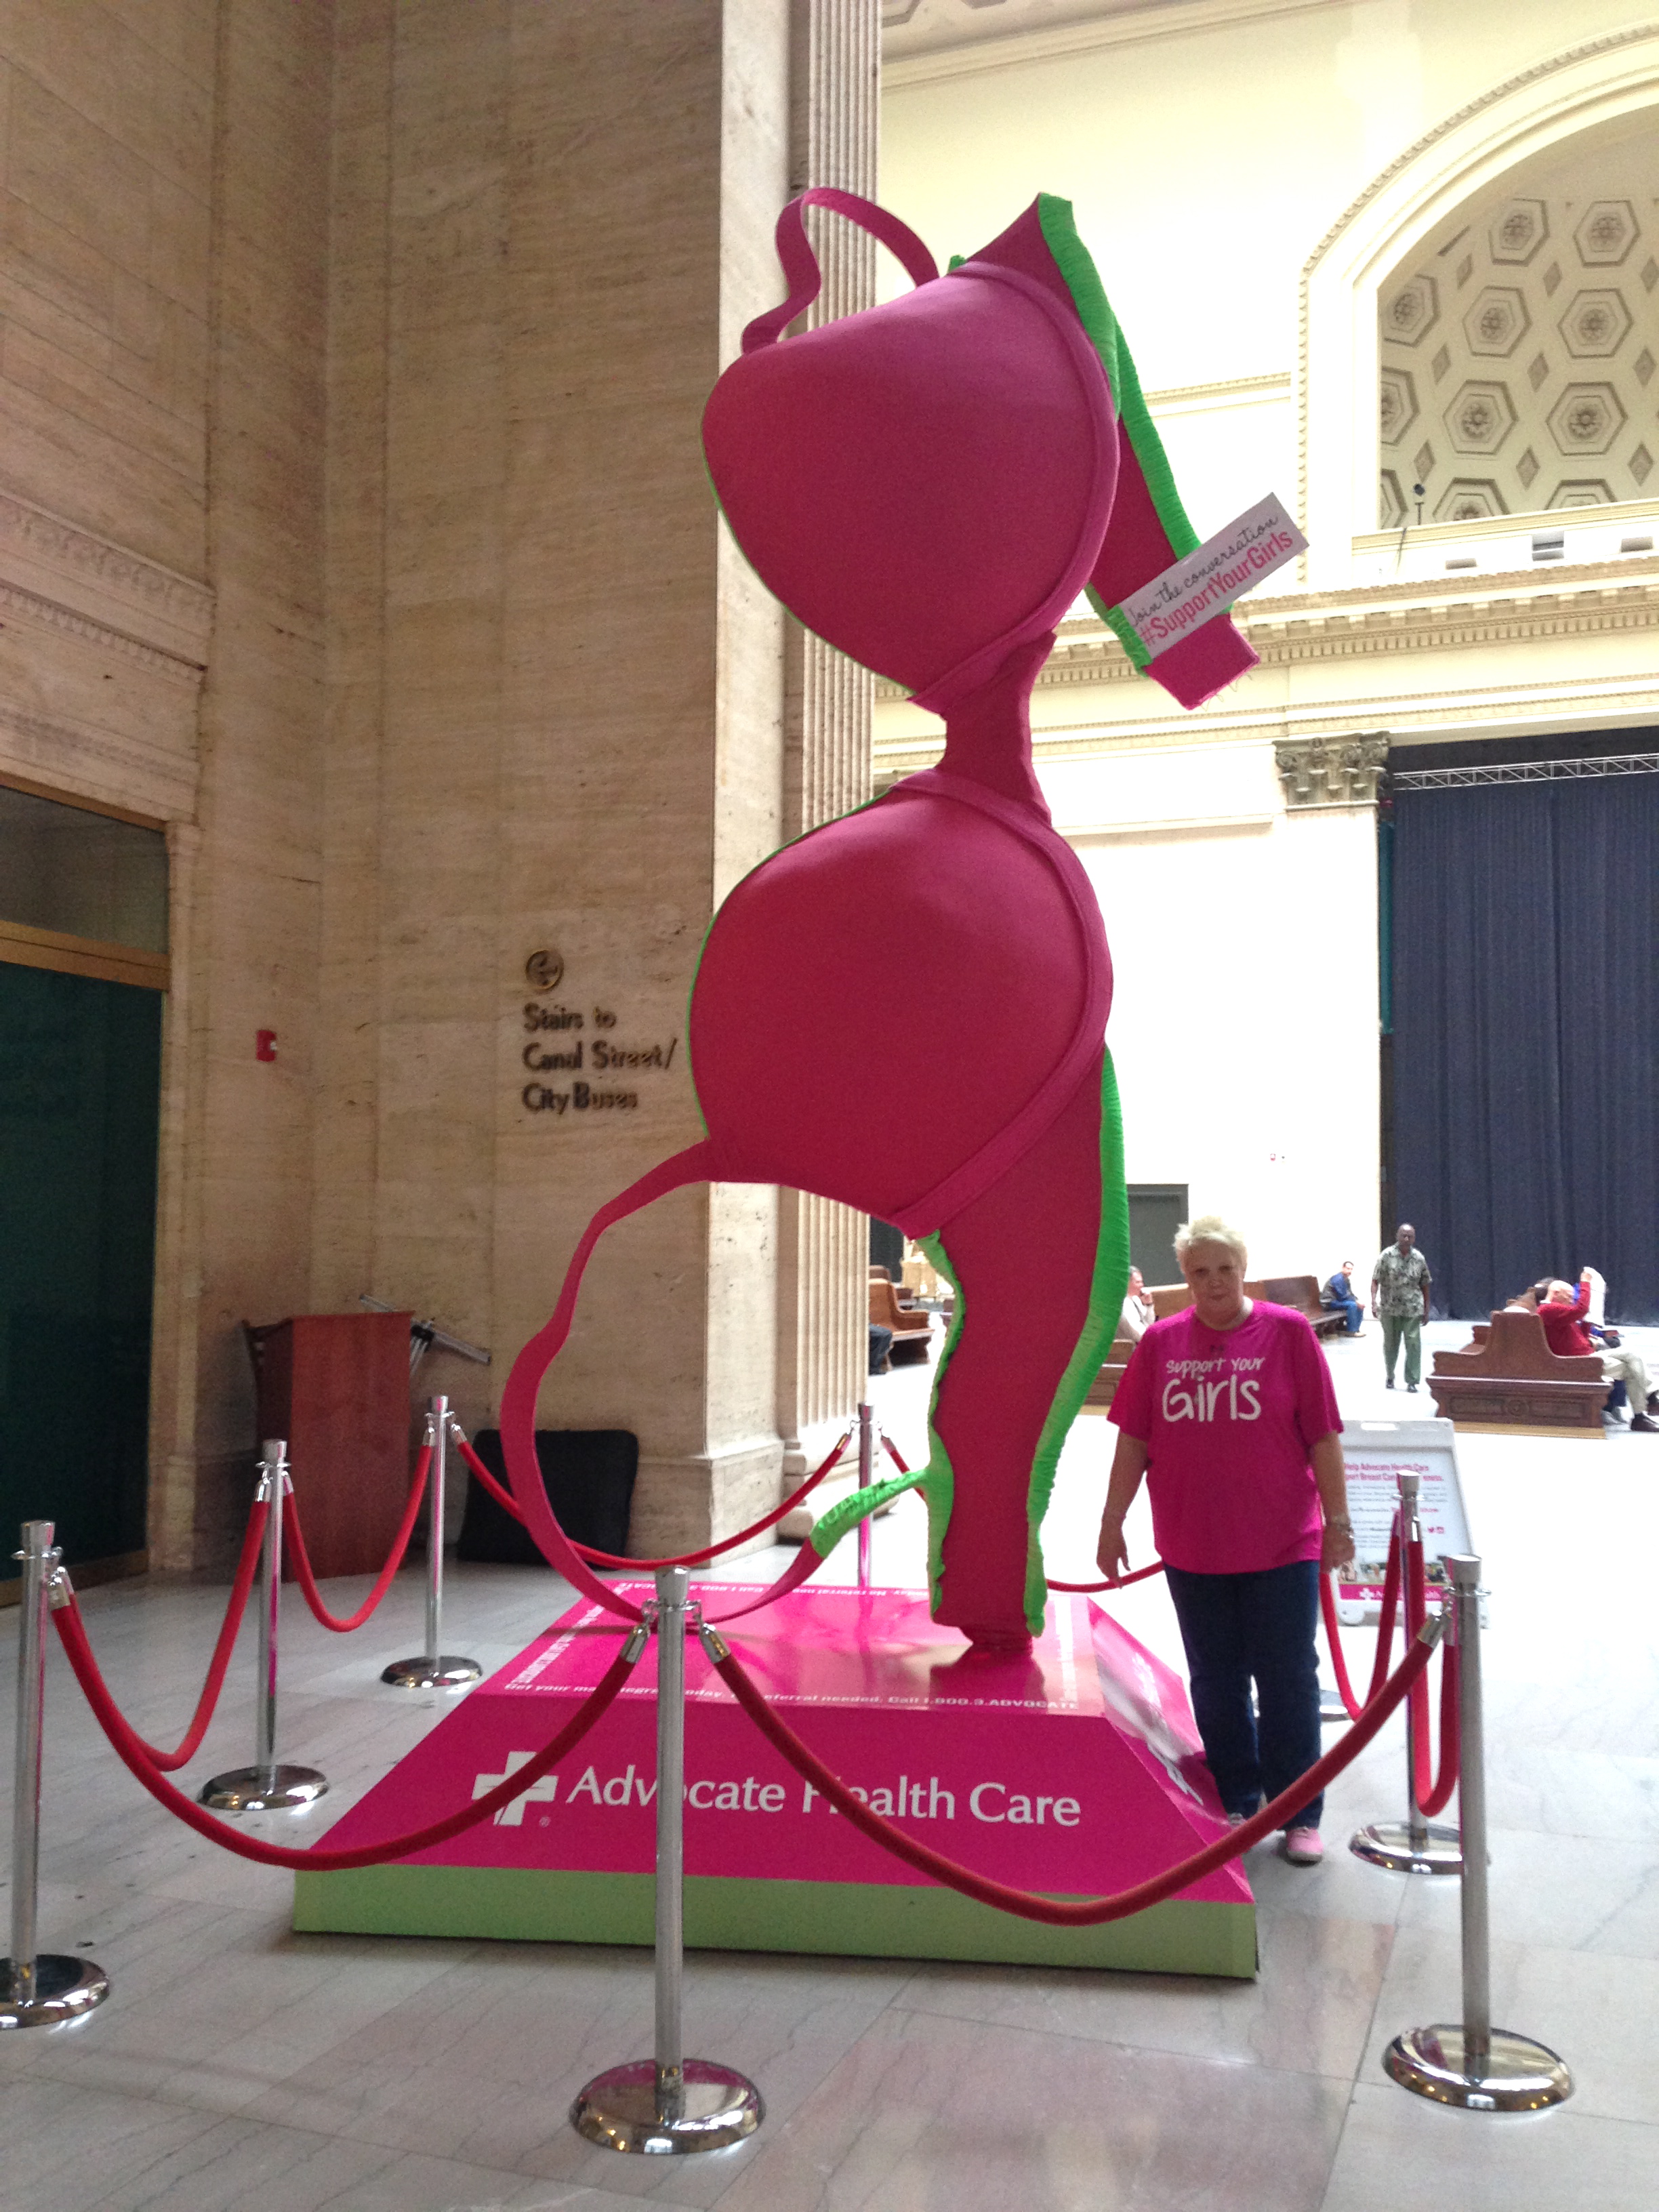 Giant bra sculpture tours Chicago for breast health – Medill Reports Chicago